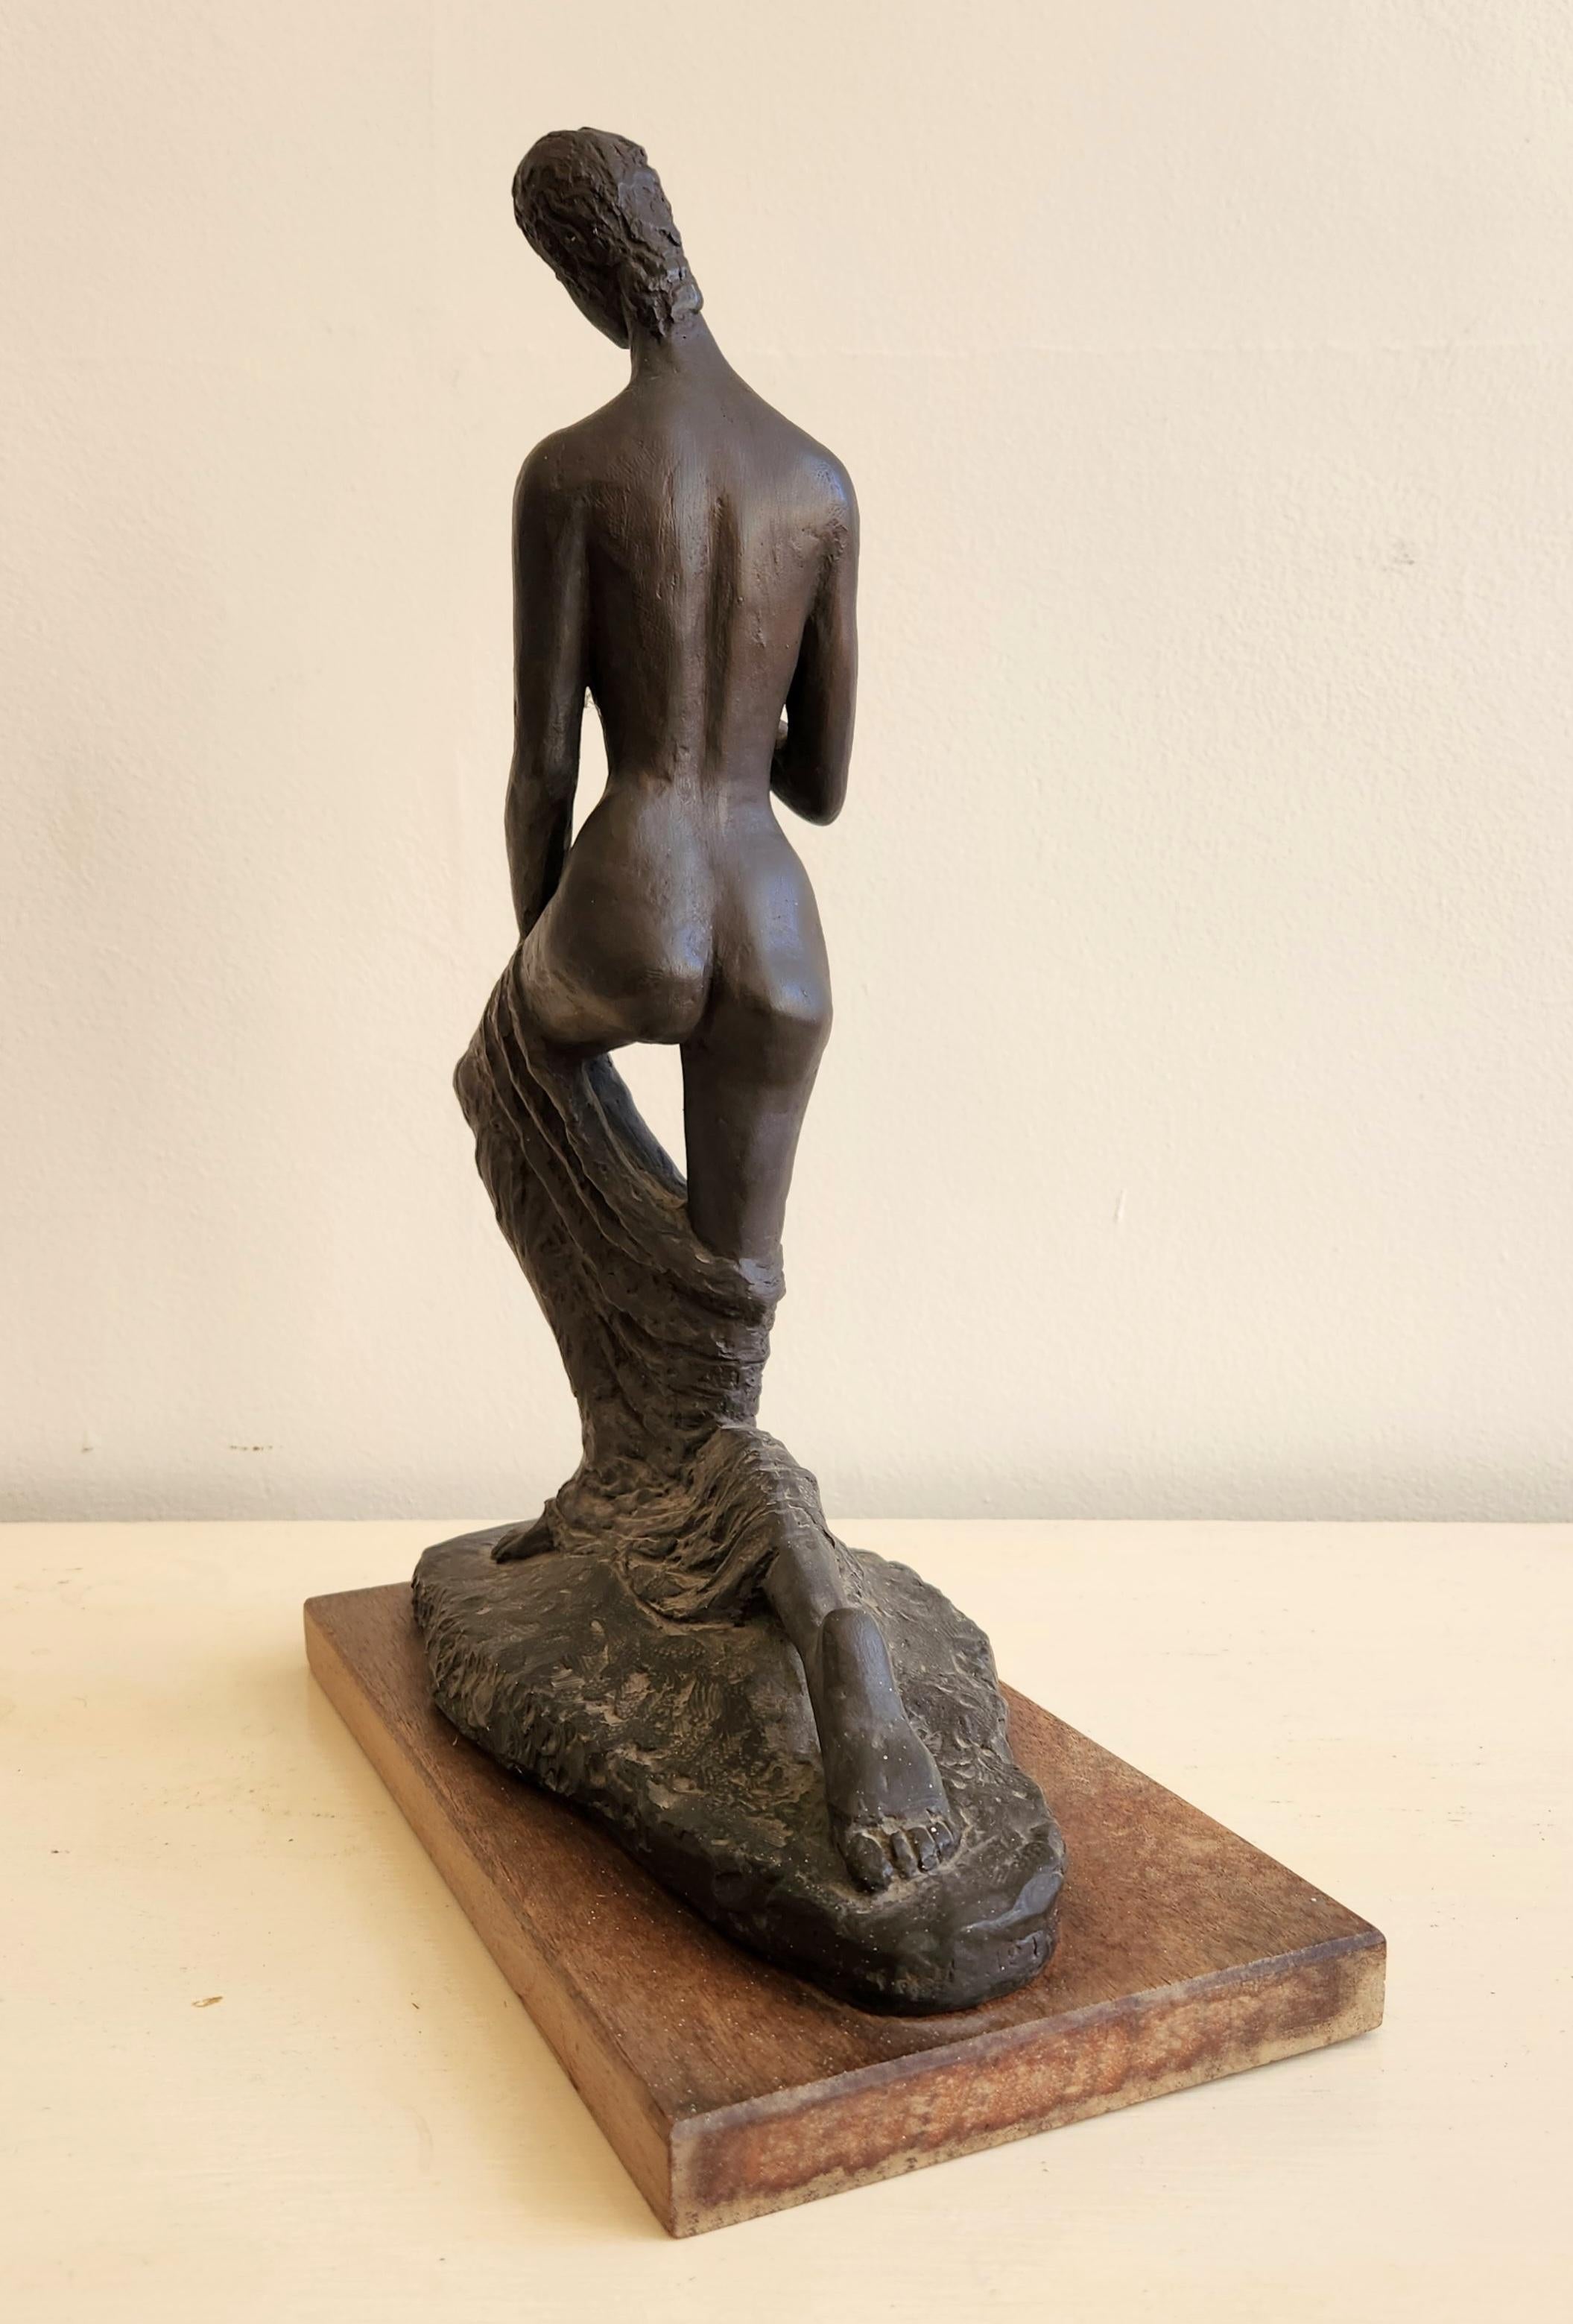 This sculpture is a small replica of Wilhelm Lehmbuck's Kneeling Woman. The original sculpture is much larger at around 69.5 x 56 x 27